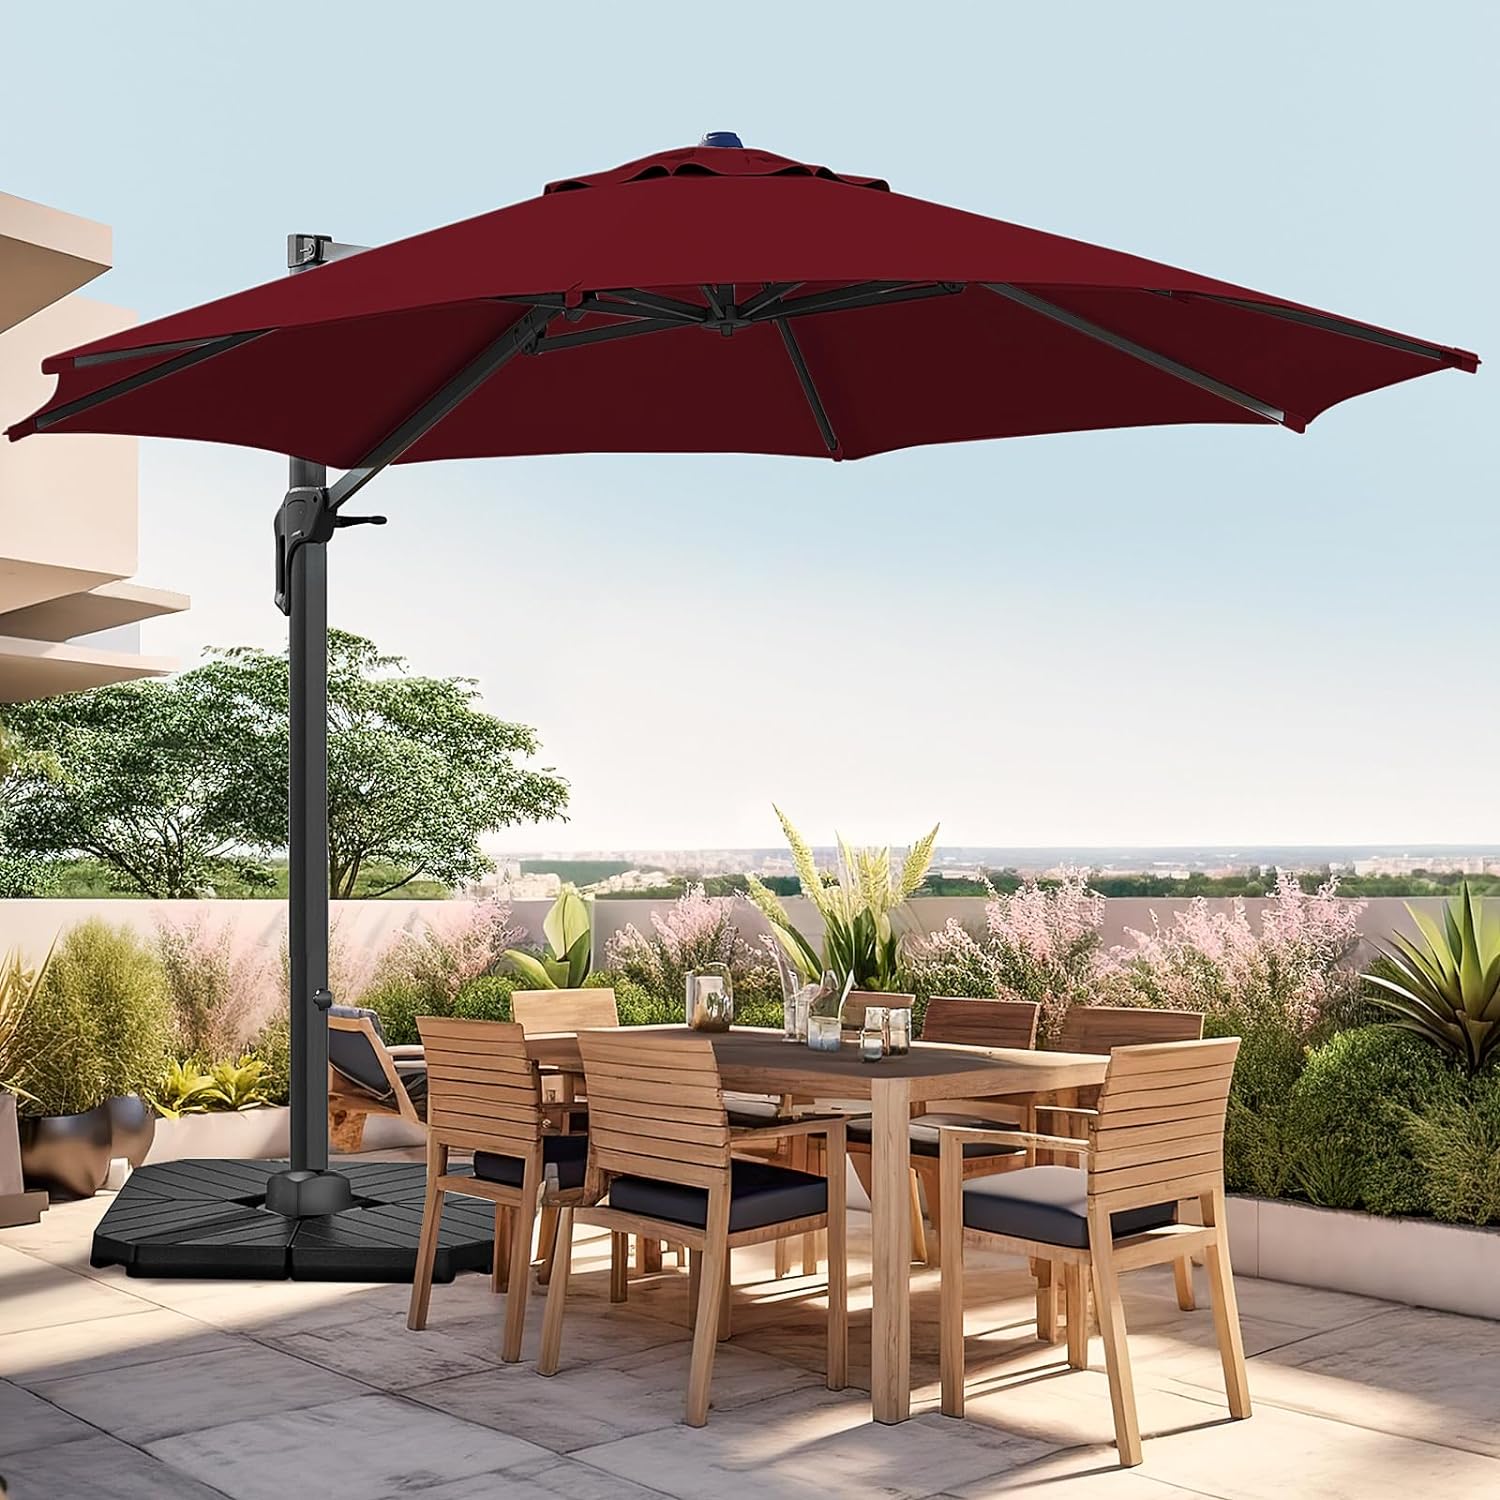 wikiwiki 11 FT Cantilever Patio Umbrellas Outdoor Offset Umbrella w/ 36 Month Fade Resistance Recycled Fabric, 6-Level 360Rotation Aluminum Pole for Deck Pool Garden, Wine Red